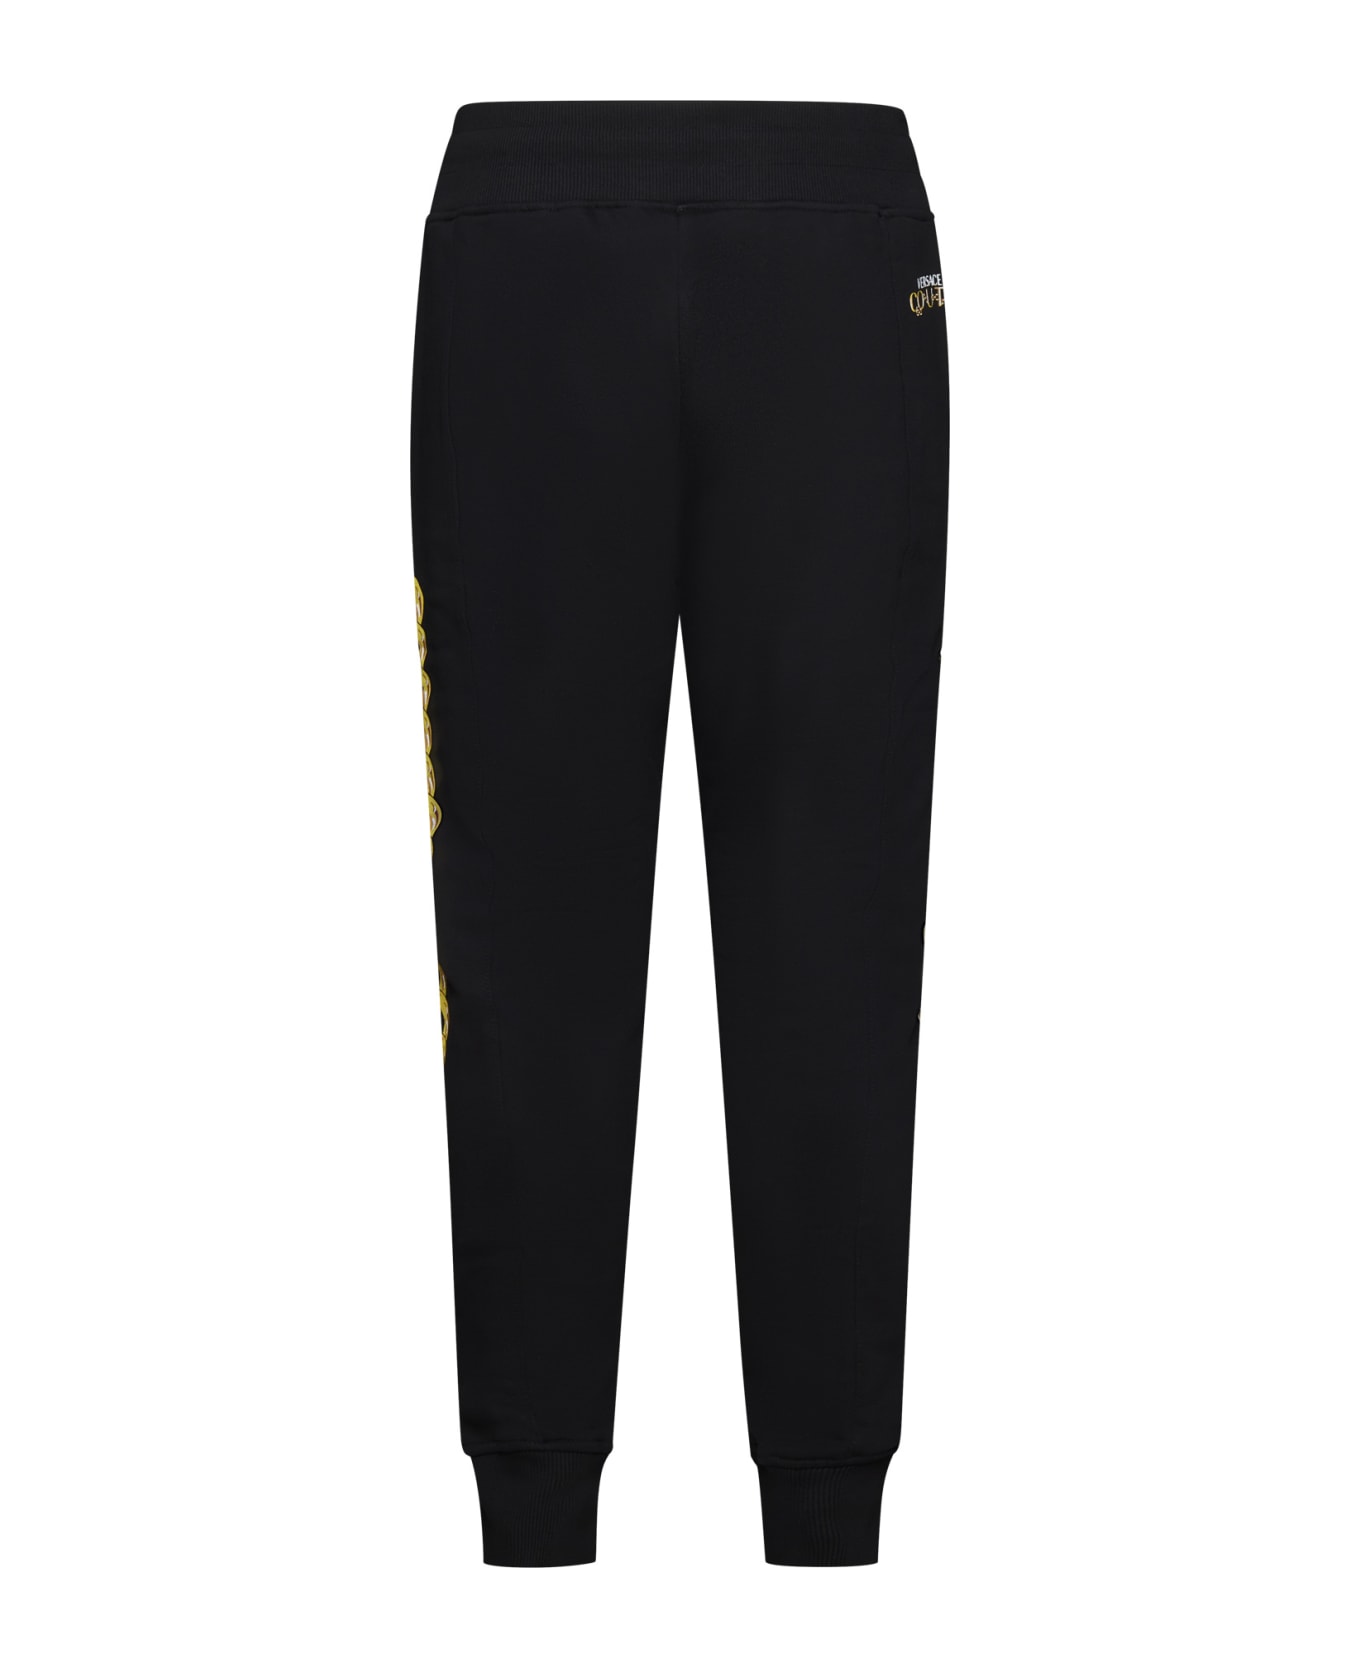 Versace Jeans Couture Jogging Pants - Black gold スウェットパンツ